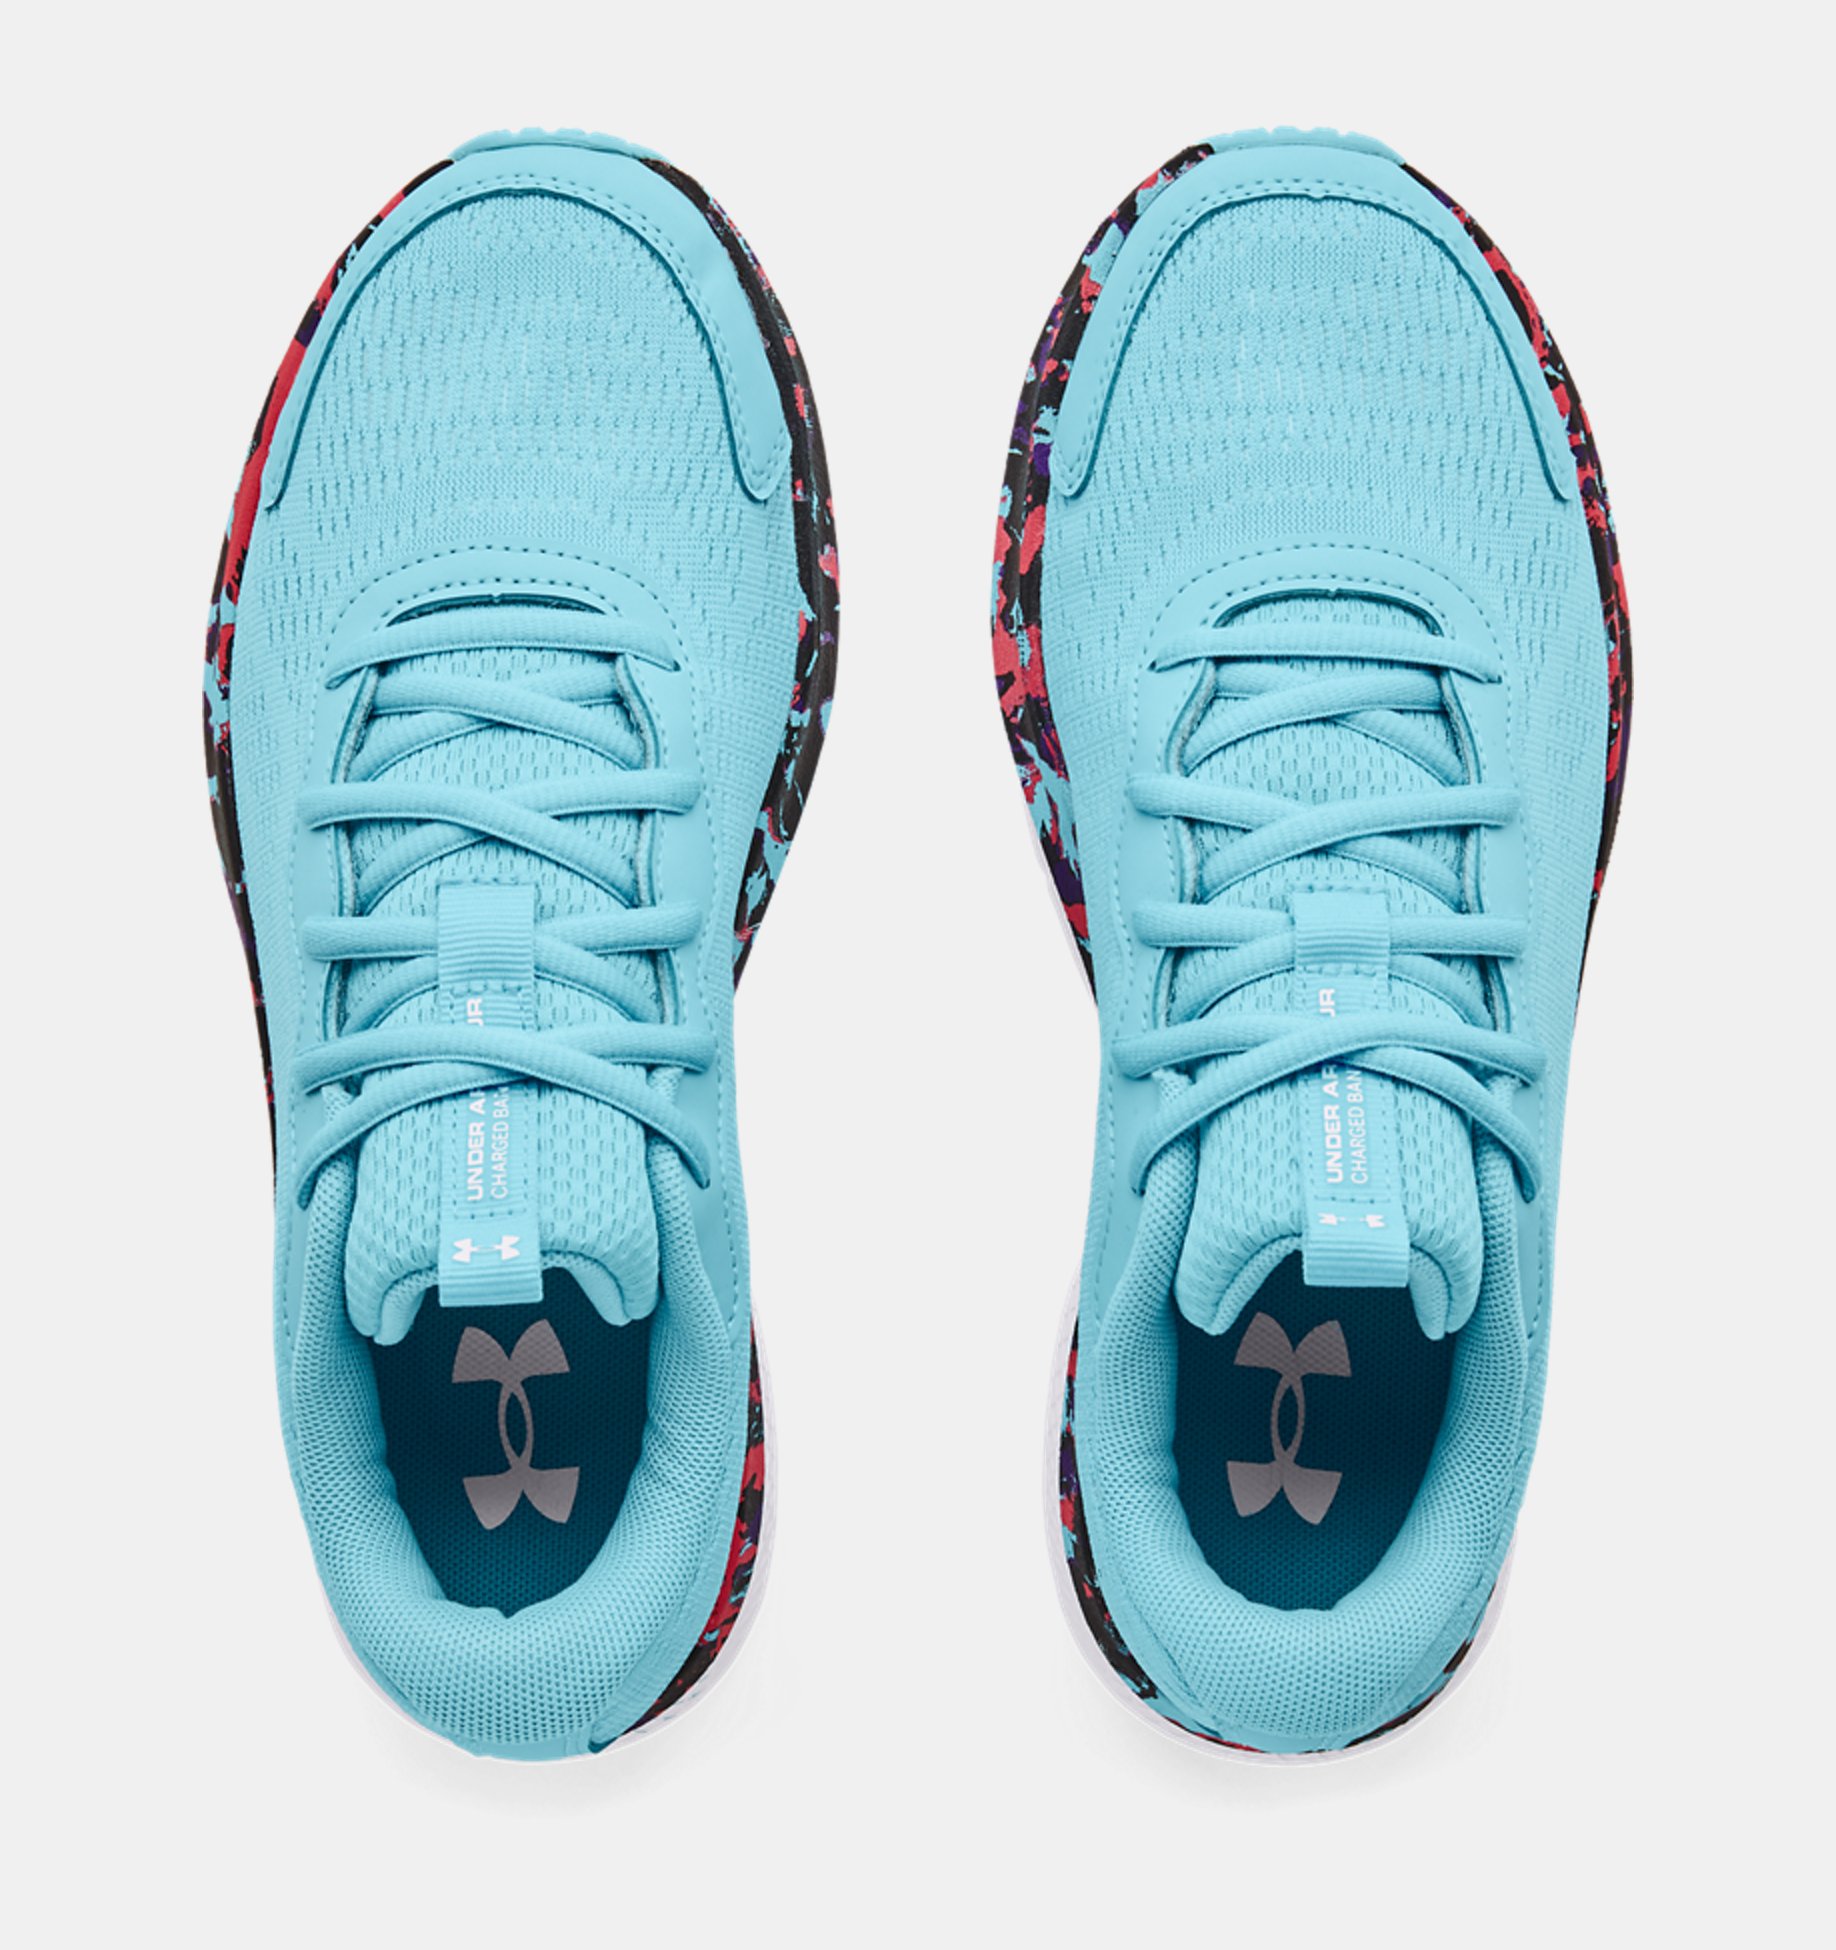 Under Armour Charged Bandit 4 Womens Running Shoes Blue . Last Few Sizes 